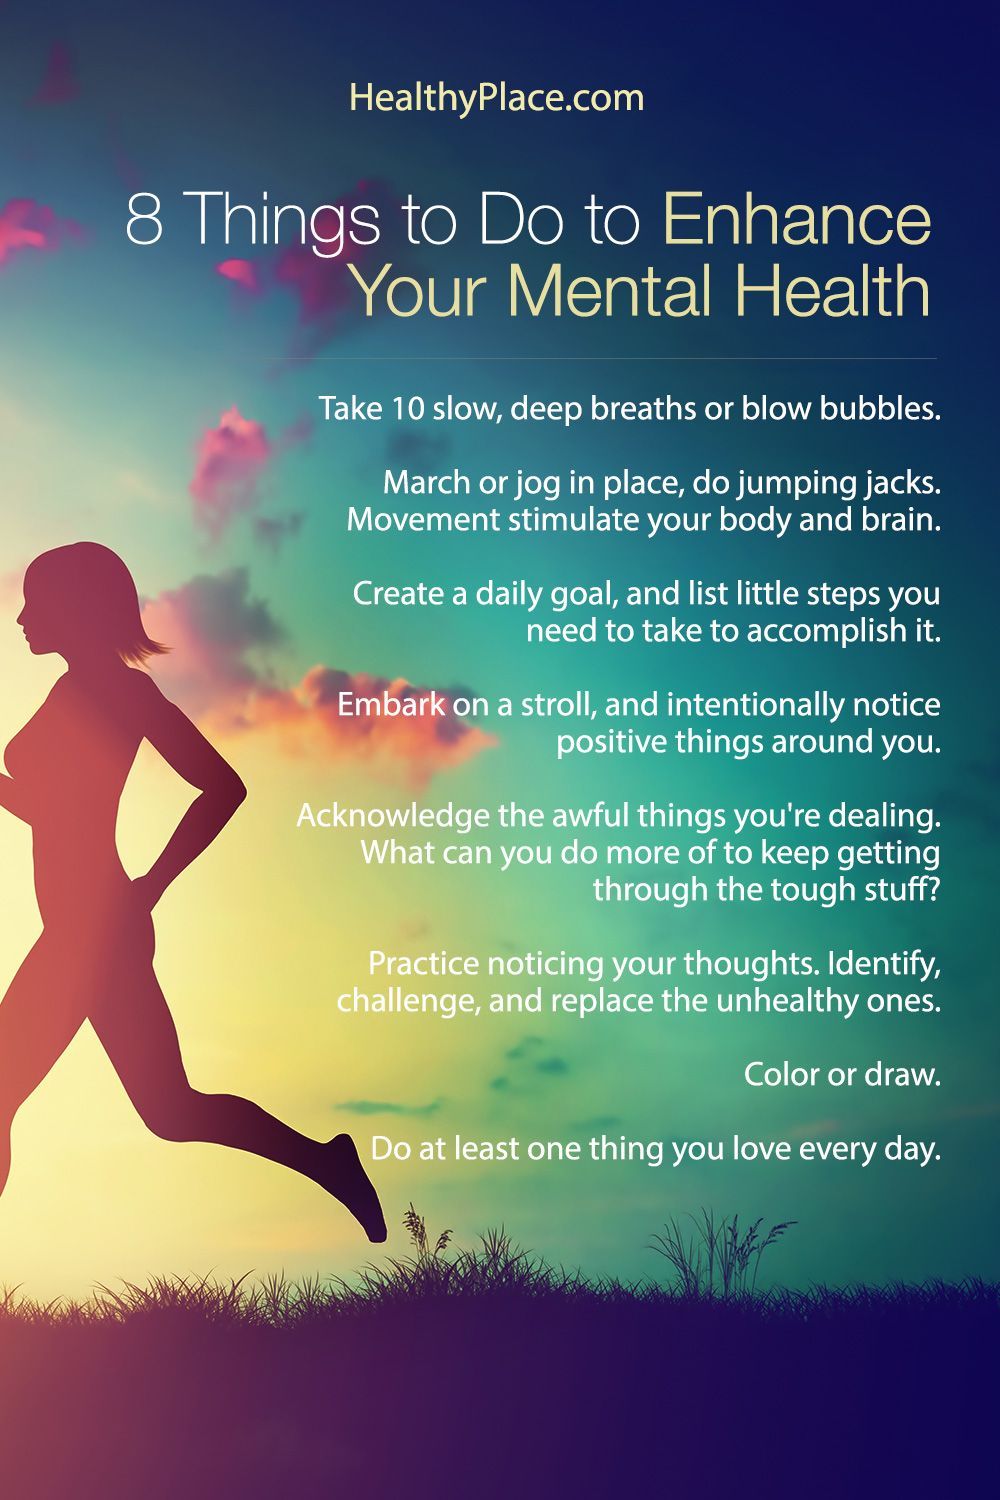 “Is it possible to enhance your mental health with every day actions? Learn 8 things you can do every day to enhance your mental